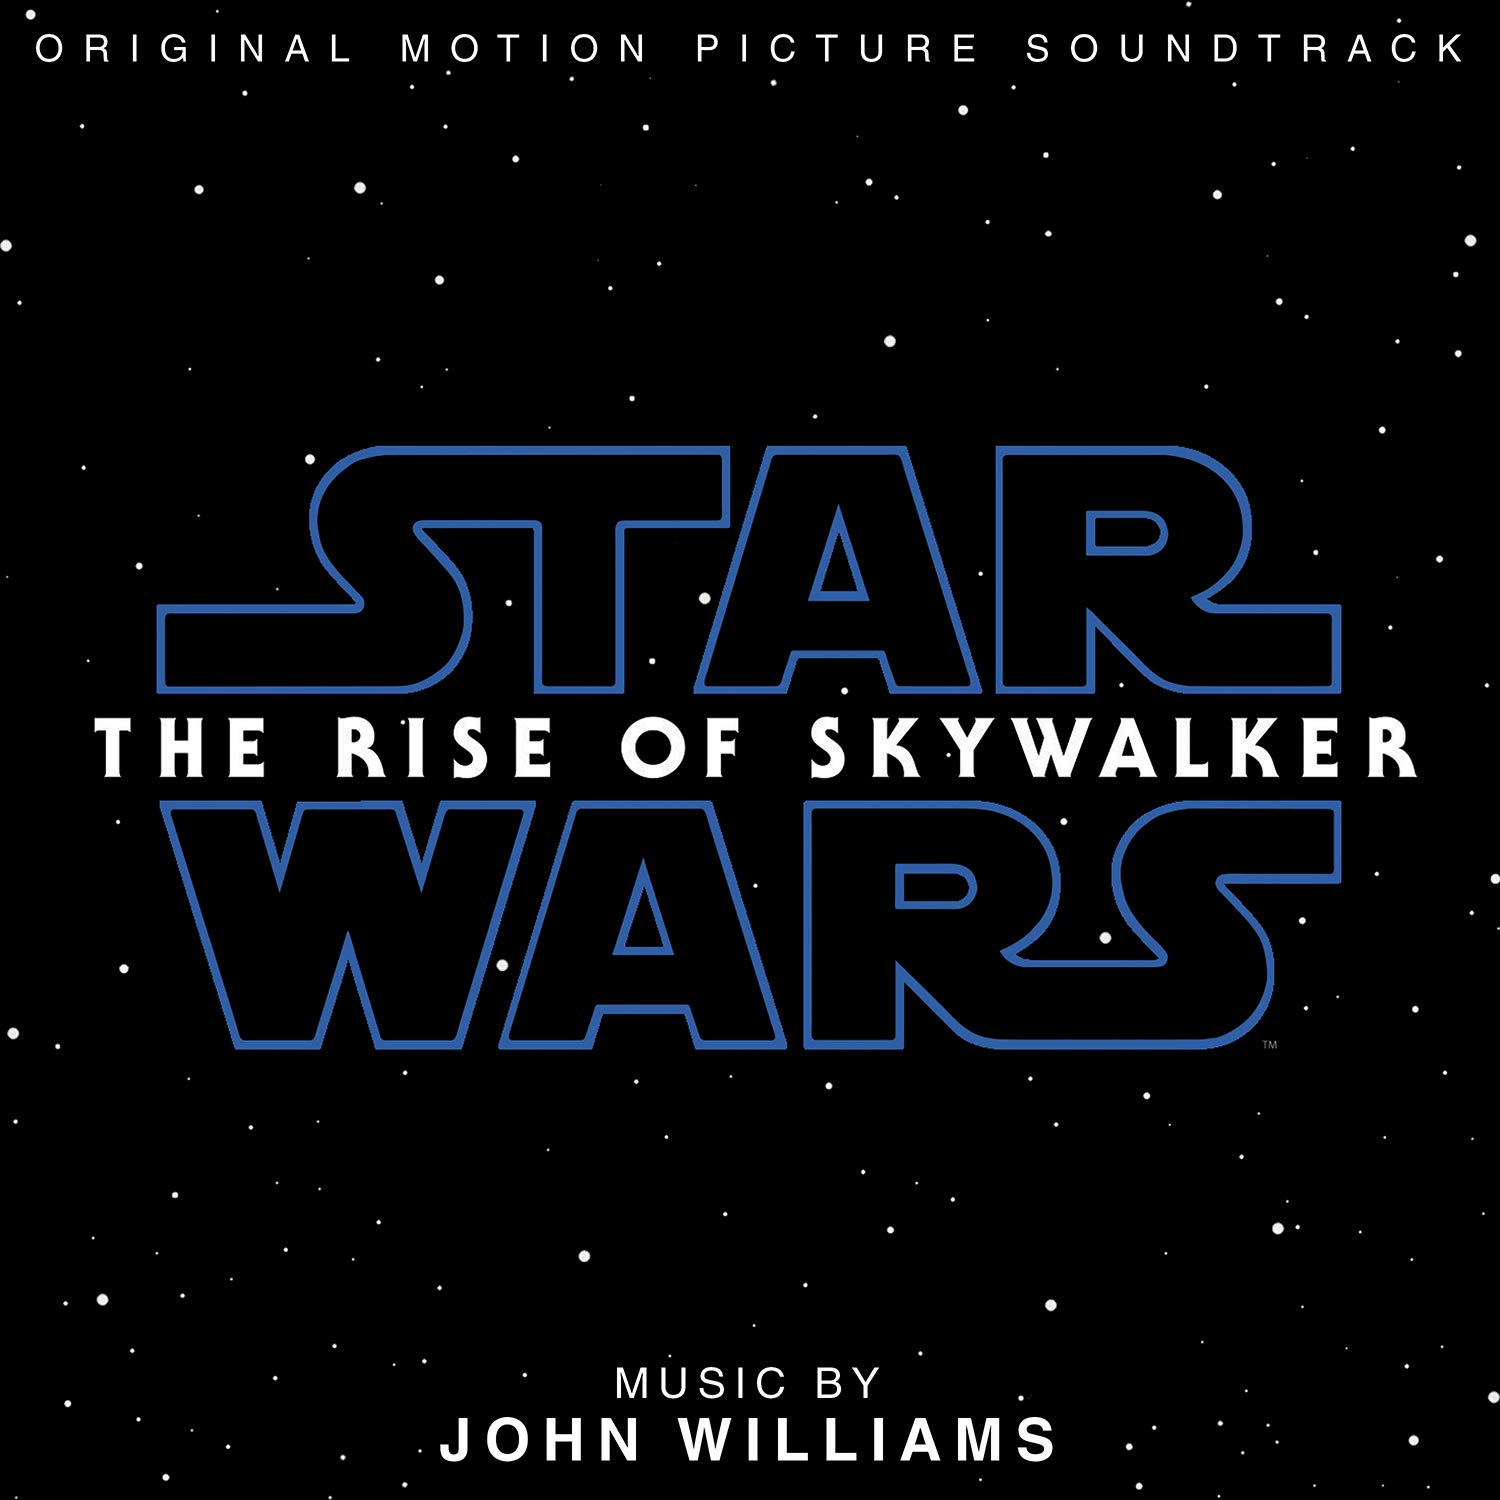 'STAR WARS - THE RISE OF SKYWALKER' - ORIGINAL MOTION PICTURE SOUNDTRACL